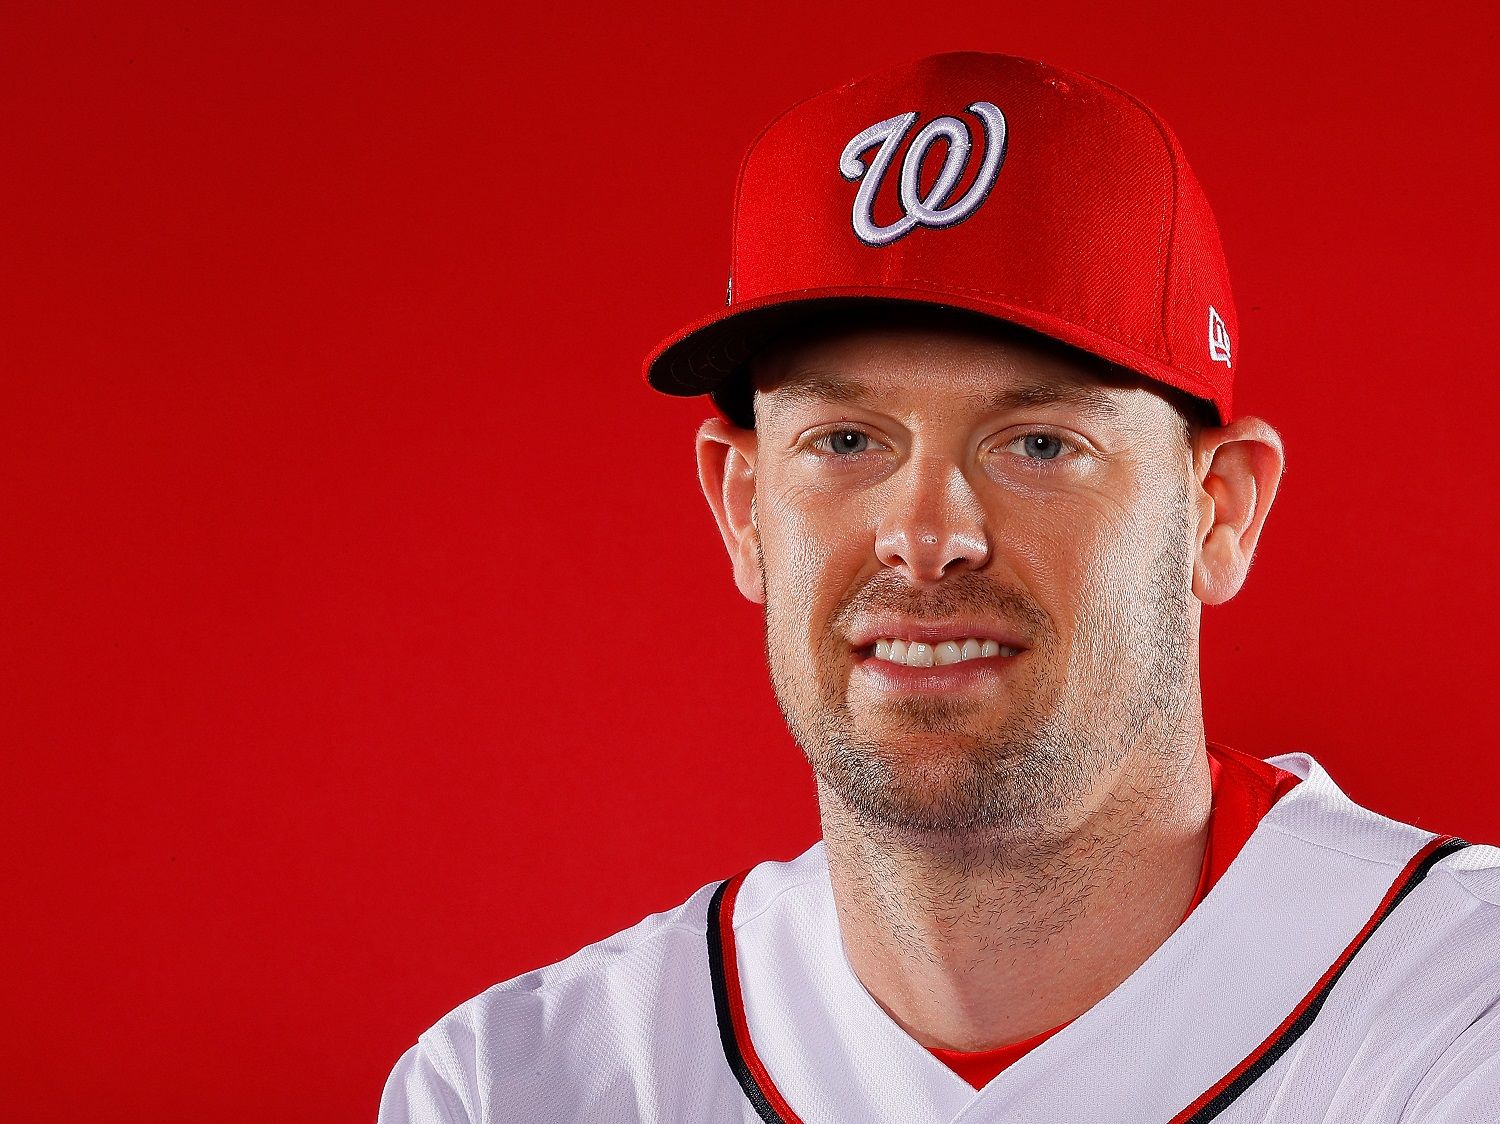 WEST PALM BEACH, FL - FEBRUARY 22:  Matt Wieters #32 of the Washington Nationals poses for a photo during photo days at The Ballpark of the Palm Beaches on February 22, 2018 in West Palm Beach, Florida.  (Photo by Kevin C. Cox/Getty Images)